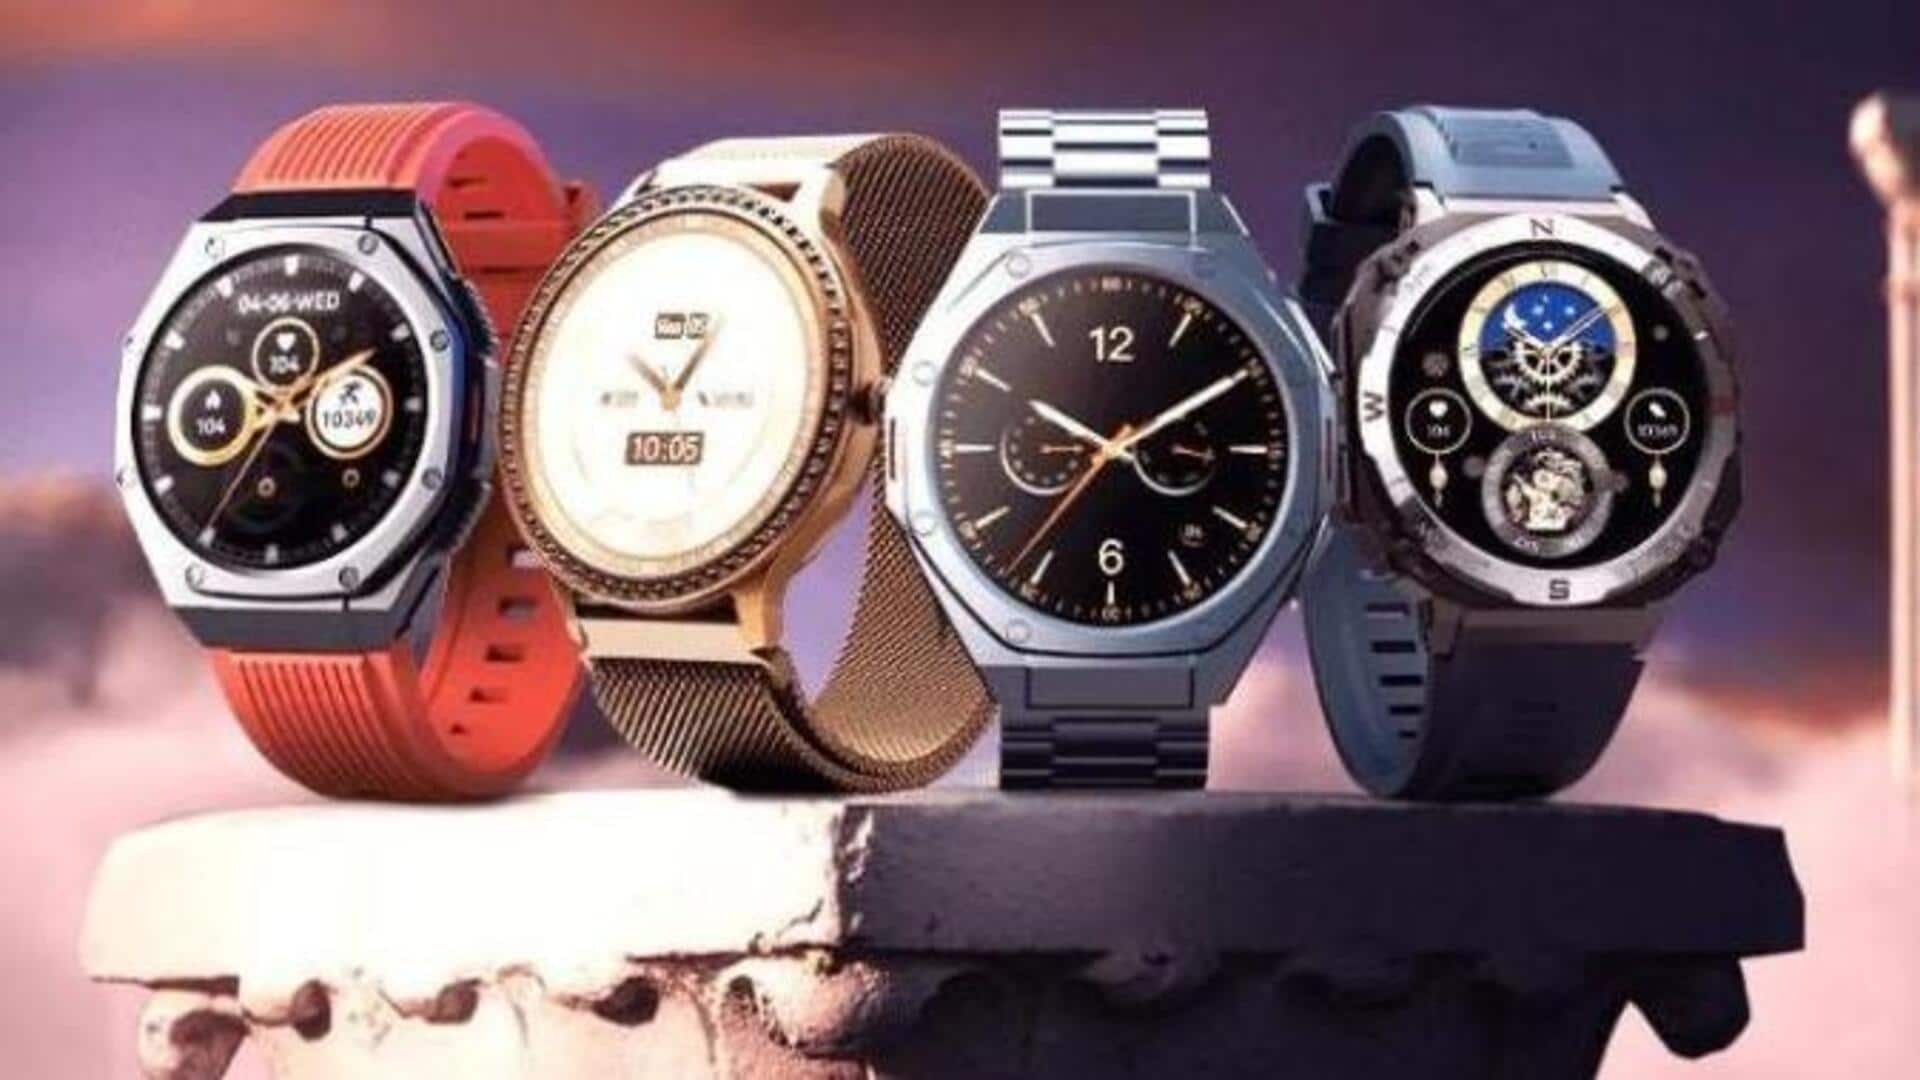 Boat announces Enigma range of smartwatches starting at Rs. 3,500